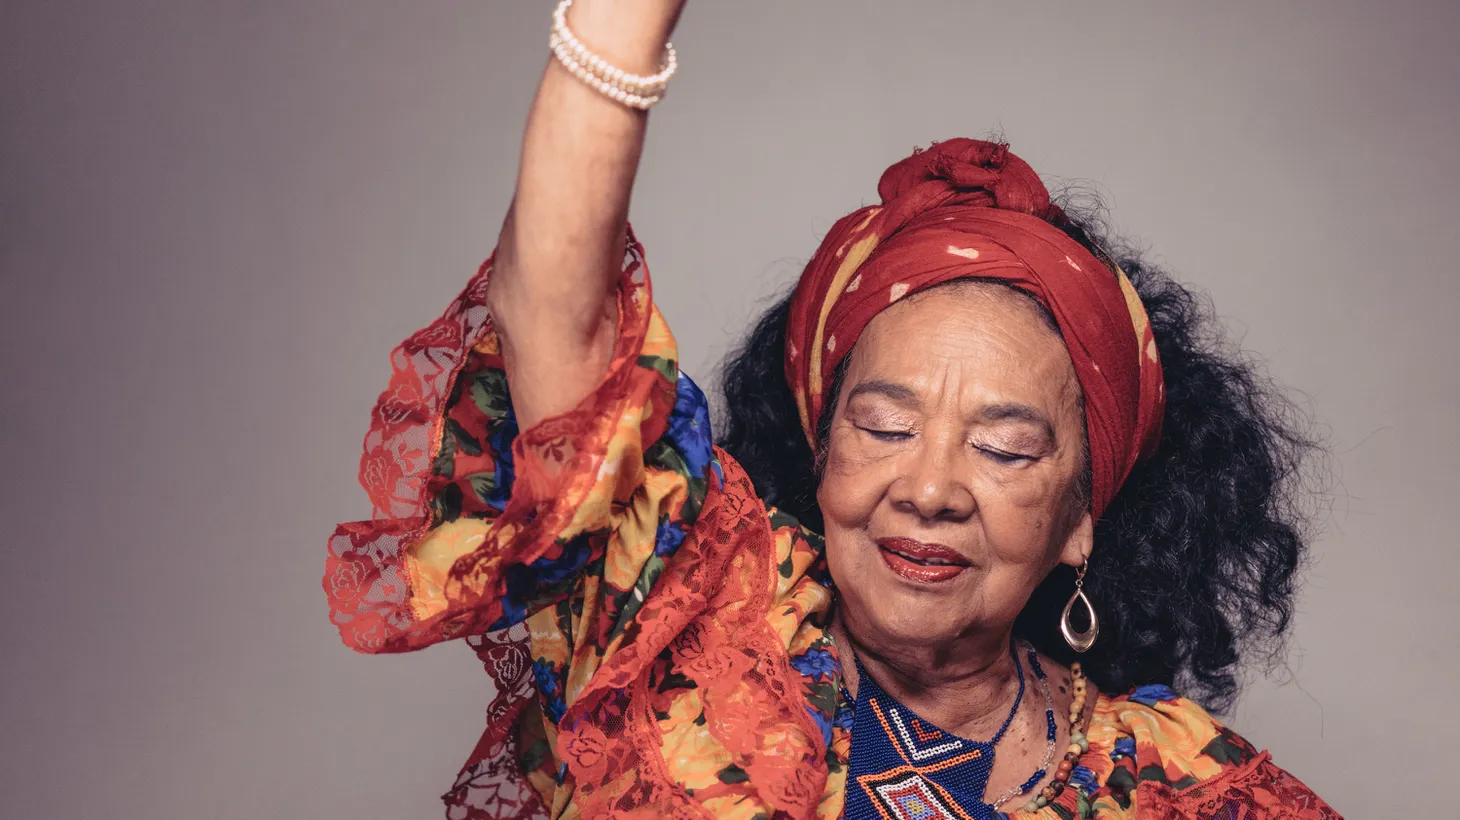 At 82, Totó la Momposina recently decided to retire from the stage.